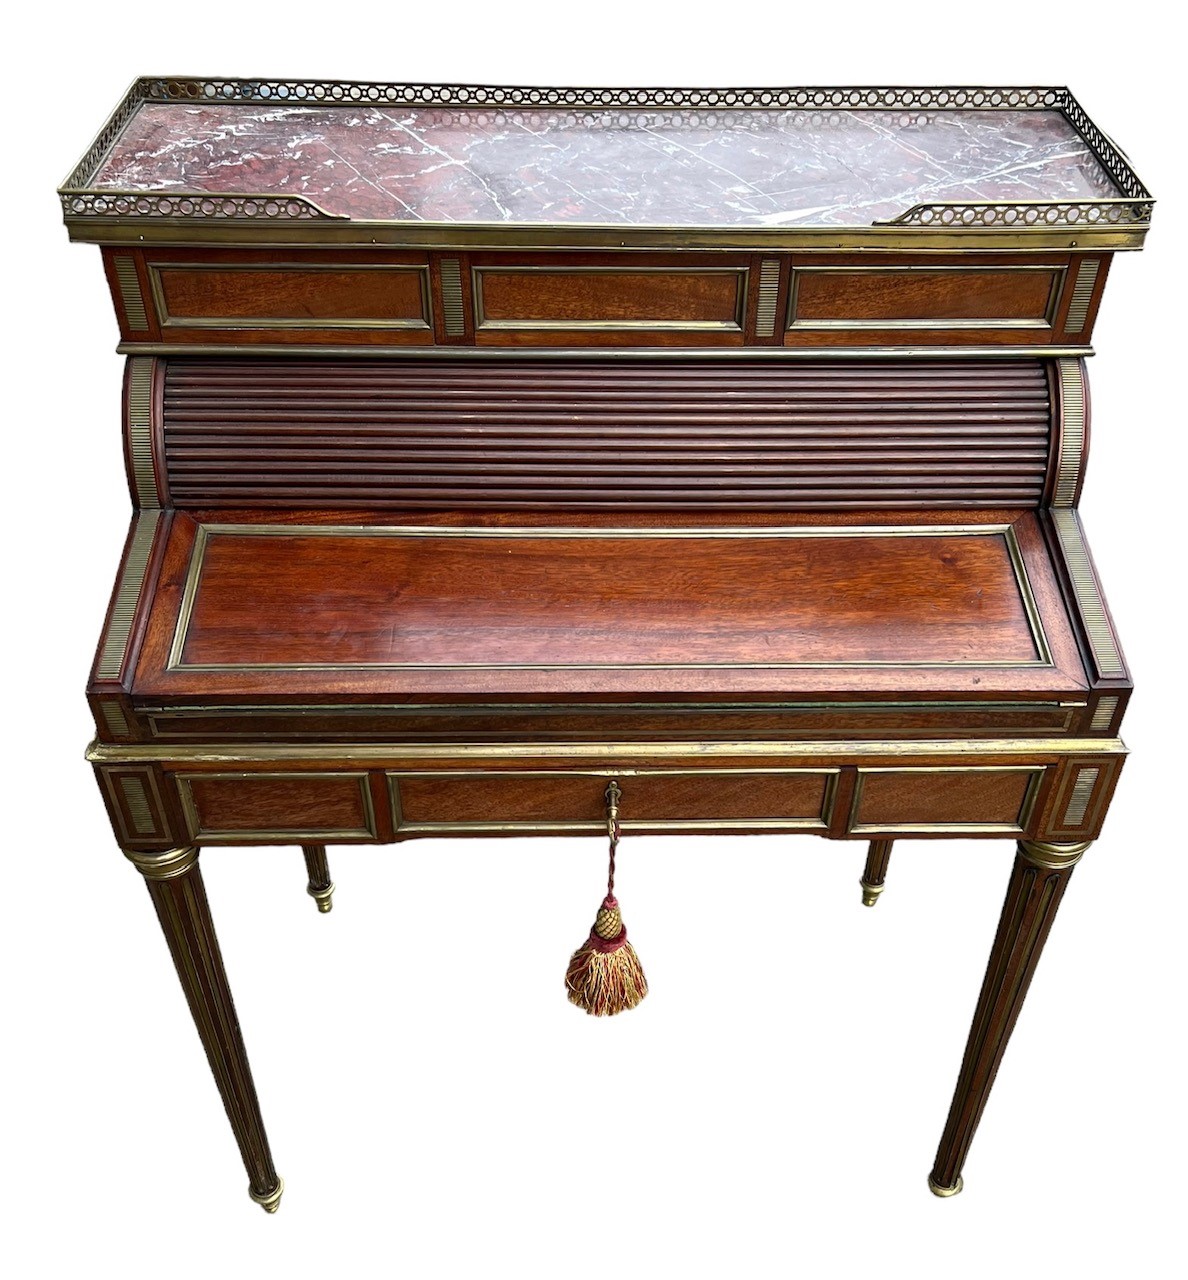 A 19TH CENTURY FRENCH LADIES’ MAHOGANY AND GILT METAL MOUNTED WRITING BUREAU DESK Having a